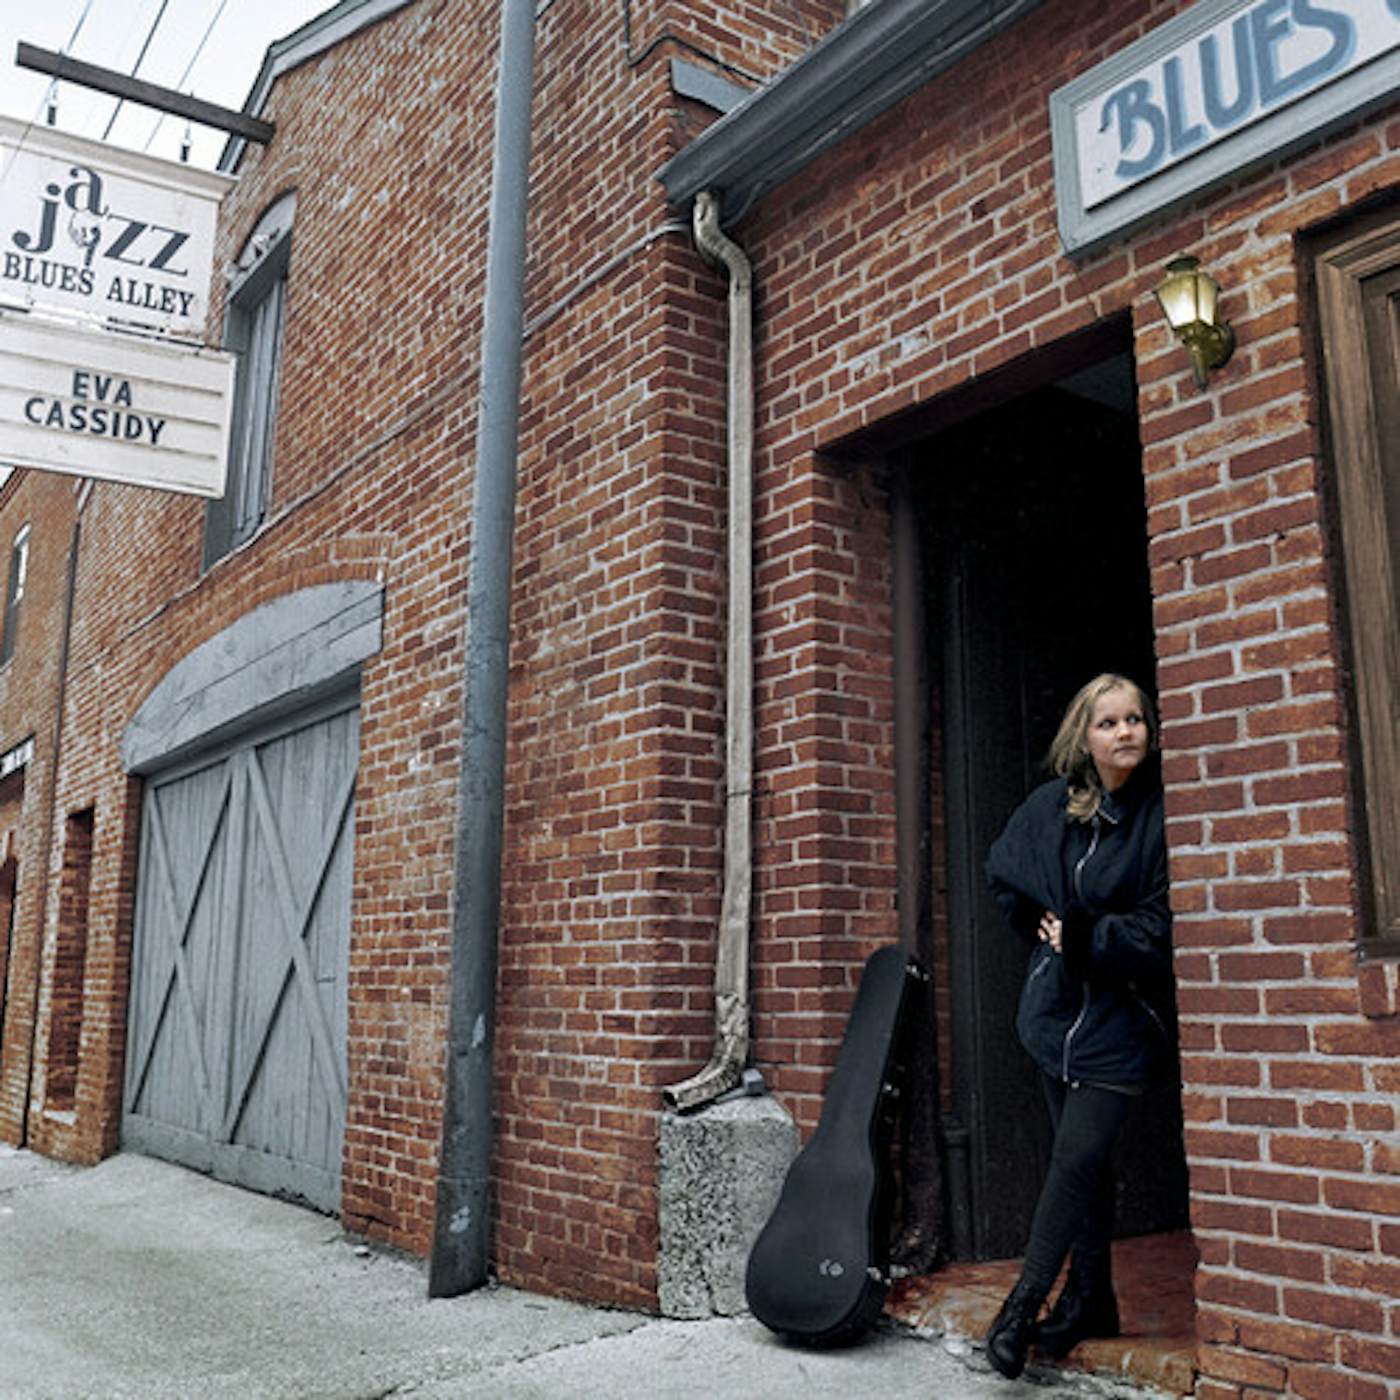 Eva Cassidy LIVE AT BLUES ALLEY (25TH ANNIVERSARY EDITION) CD